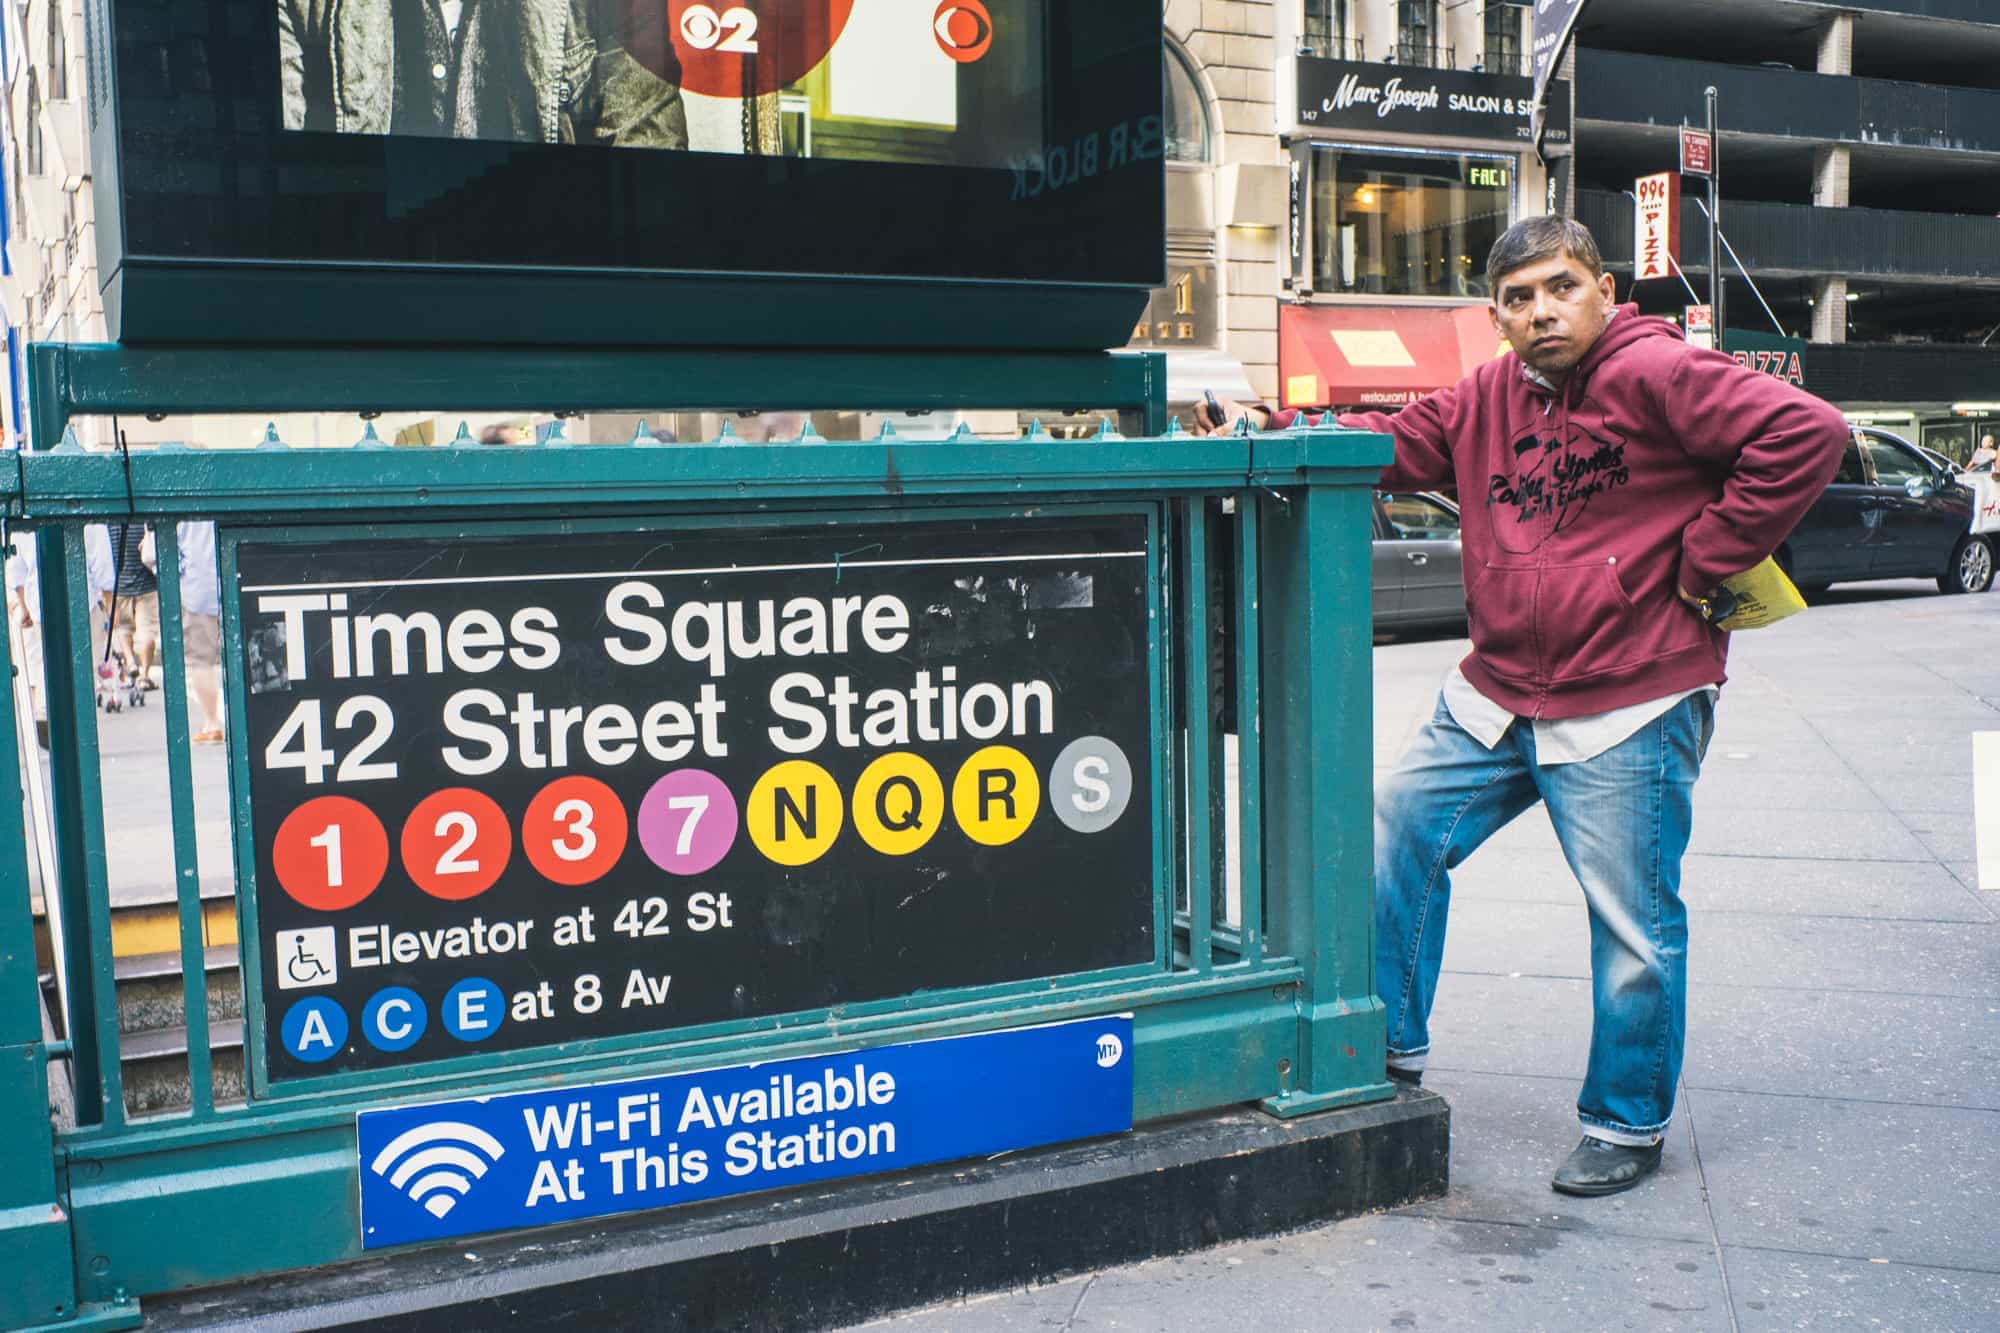 A man waits near the Time Sq 42nd street subway station sign in Time Square New York City.